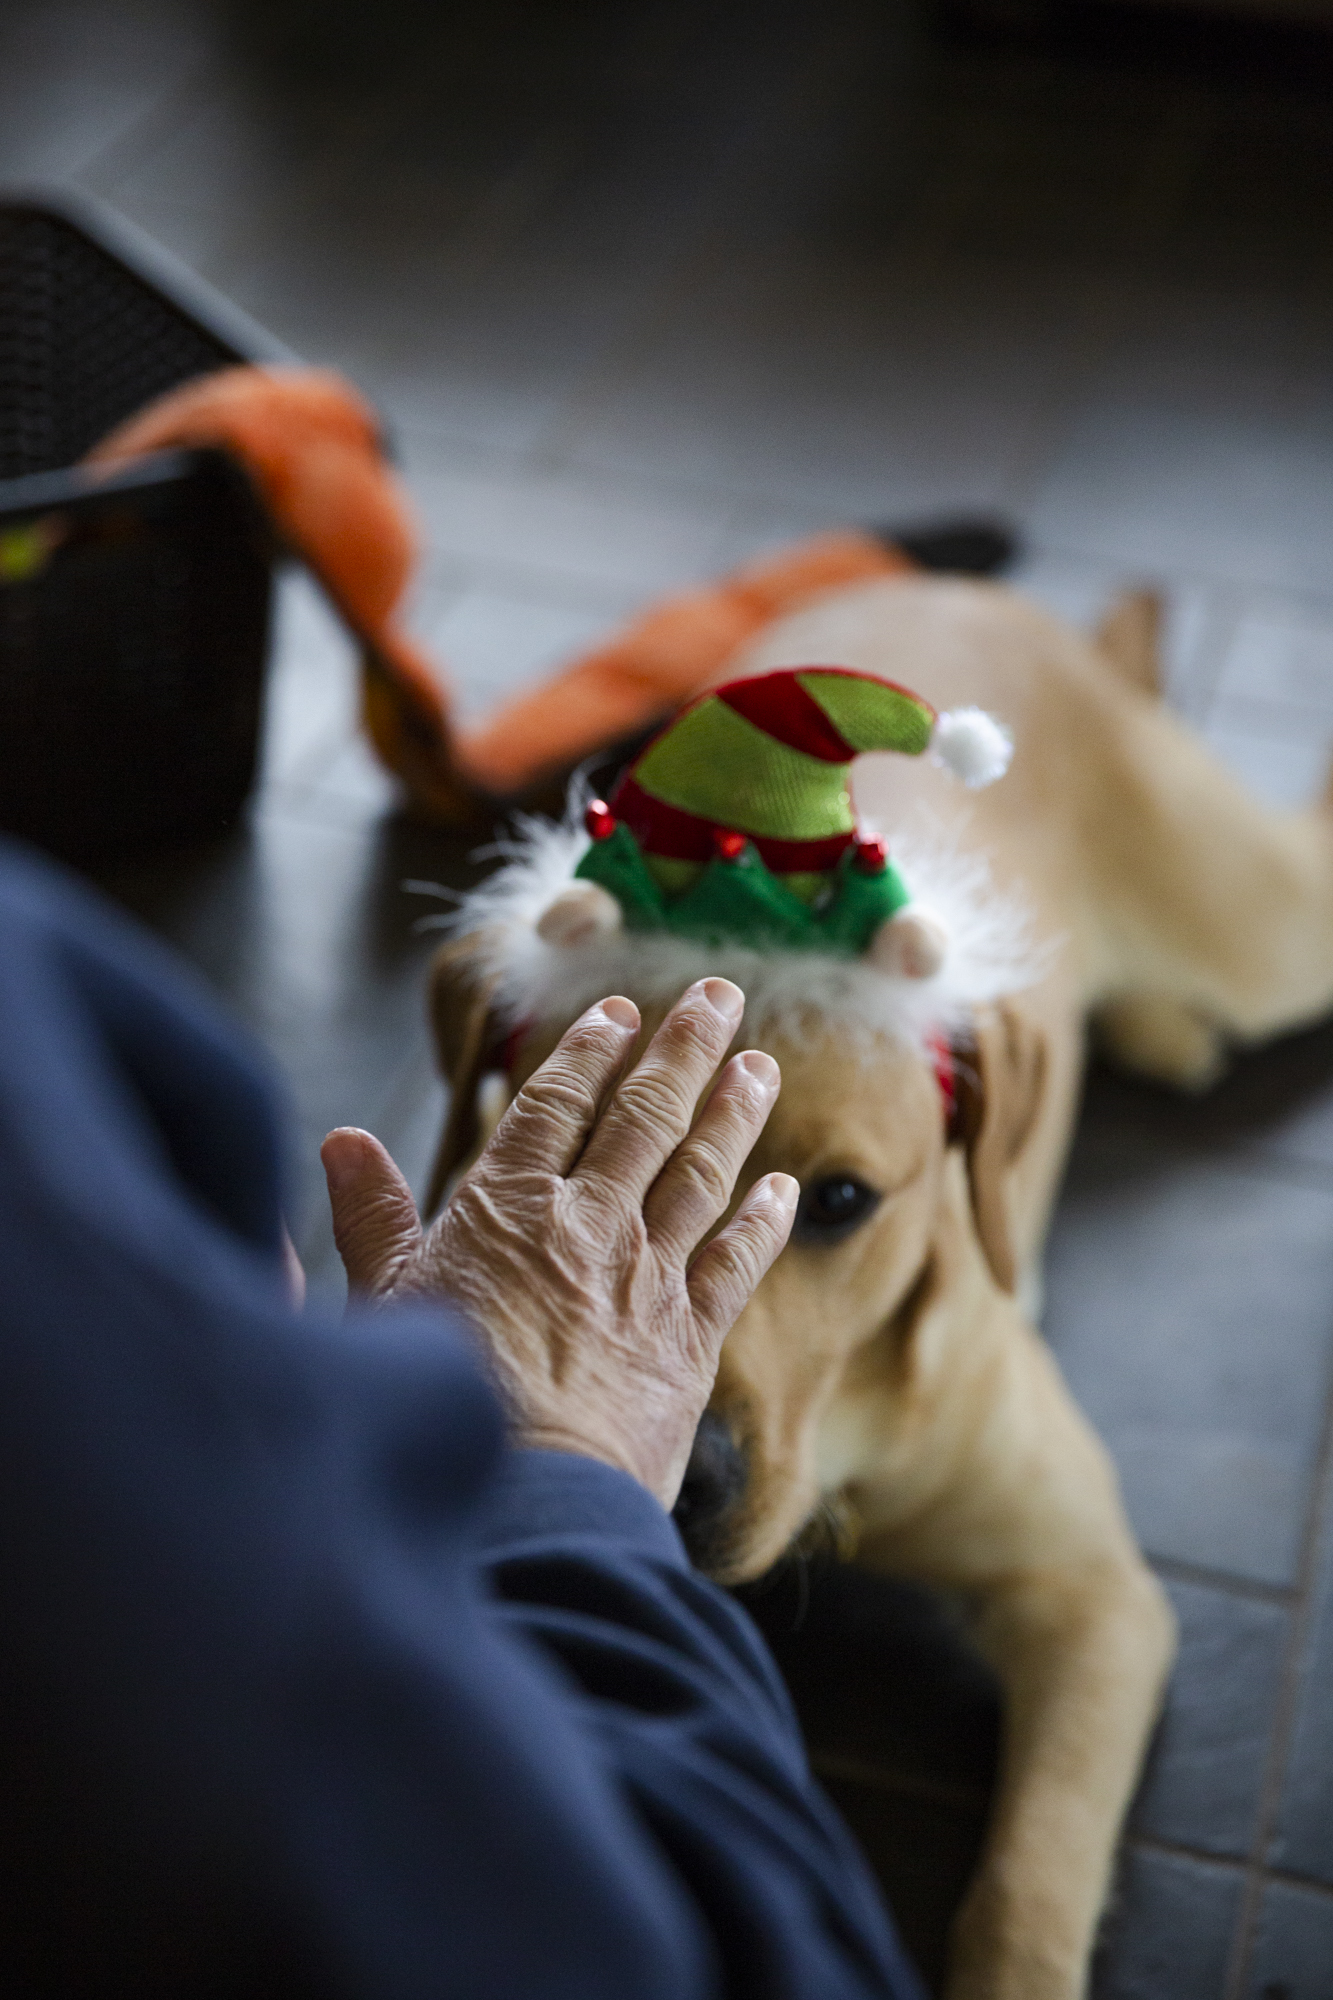  Cindy tells Brody to stay while he's wearing elf ears and a hat in Cindy's home in Northern Chili, NY, Nov 30, 2018. Although not formally trainers, Guiding Eyes raisers teach basic hand gesture commands standard to the Guiding Eyes training regime.